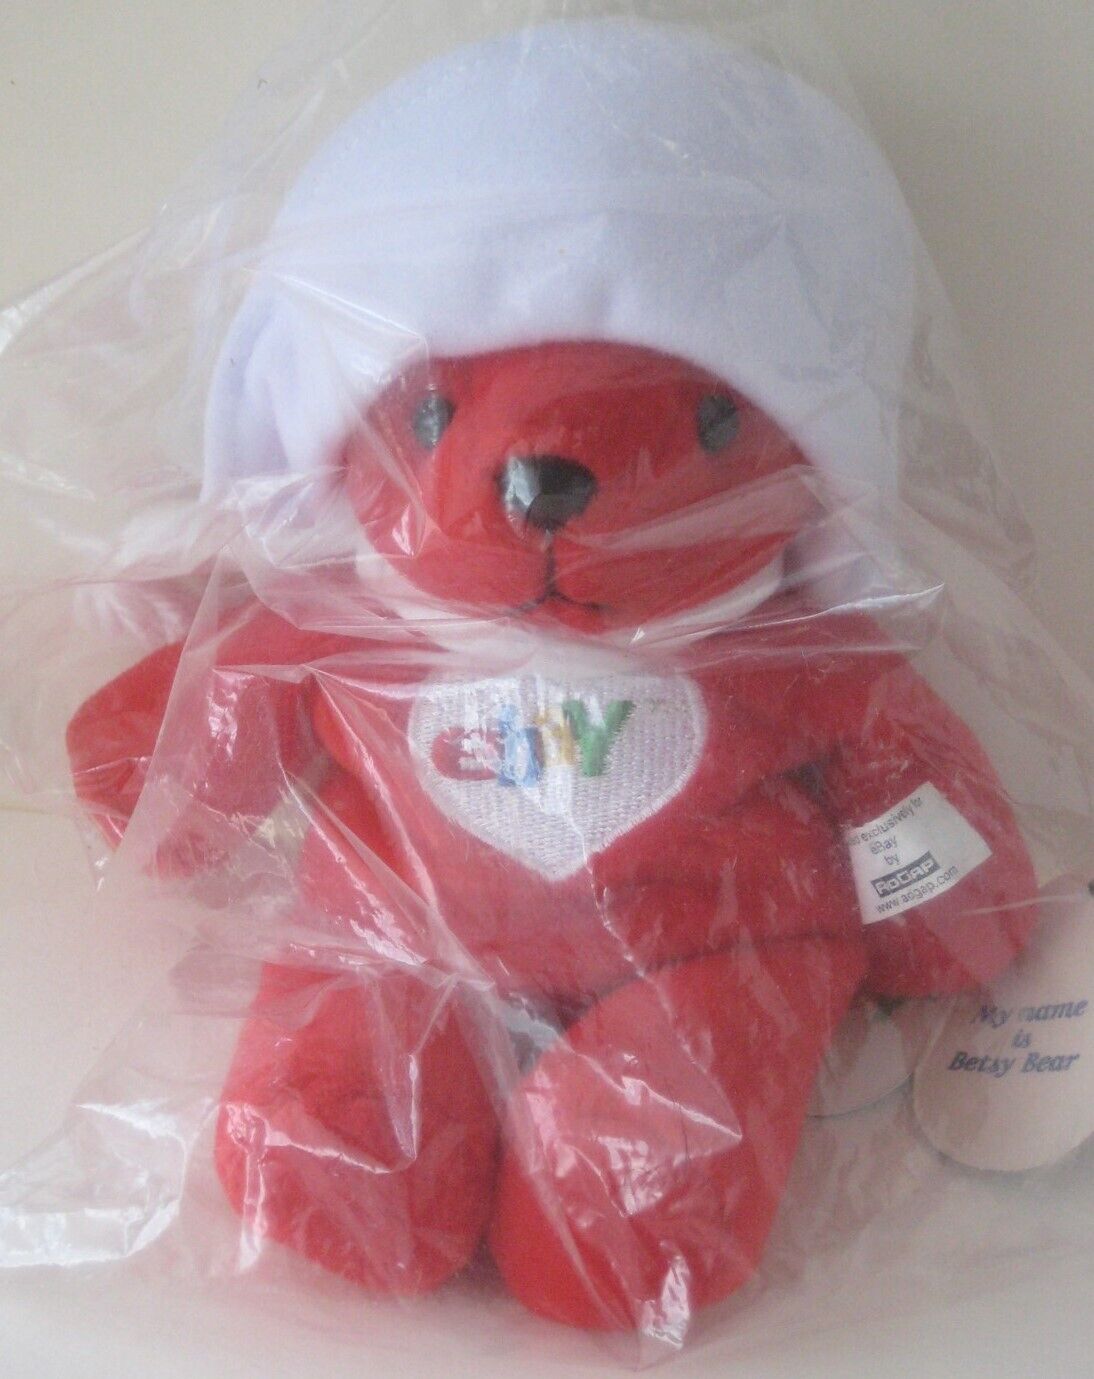 Official BETSY BEAR Stuffed Toy in Original Unopened Bag eBay Limited Edition 